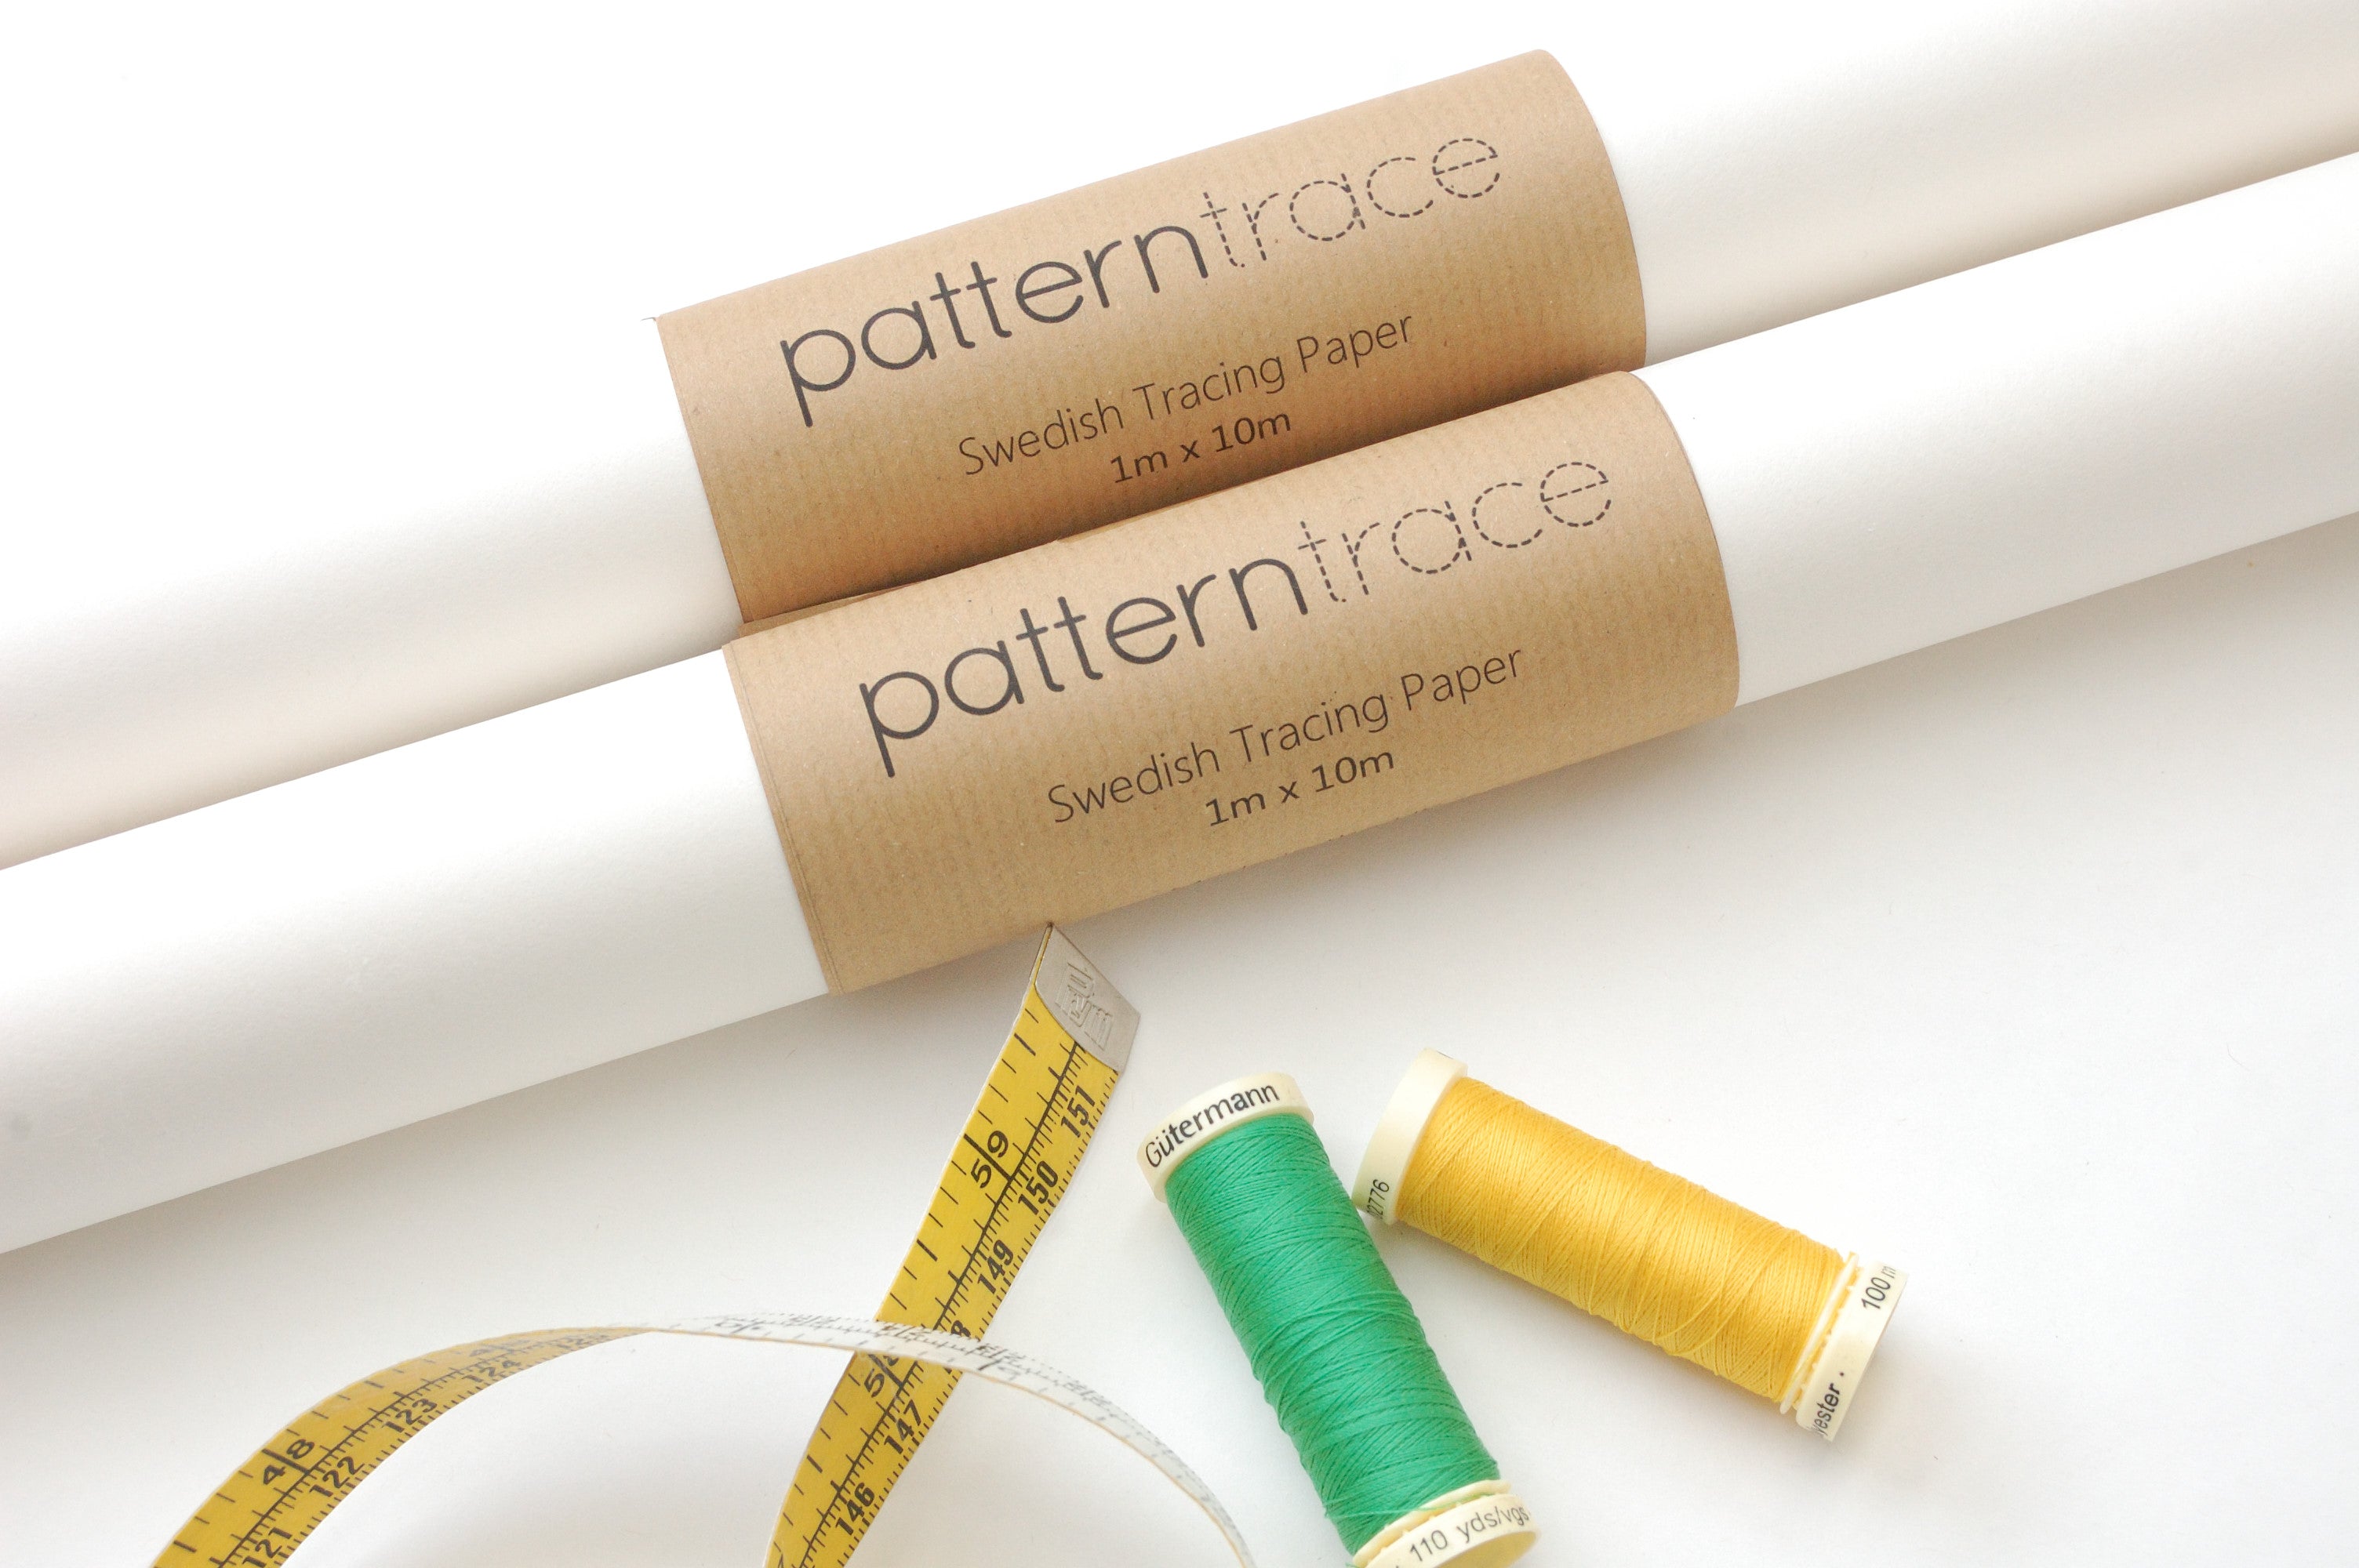 Patterntrace - 10m Swedish Tracing Paper – Sure-Fit Designs